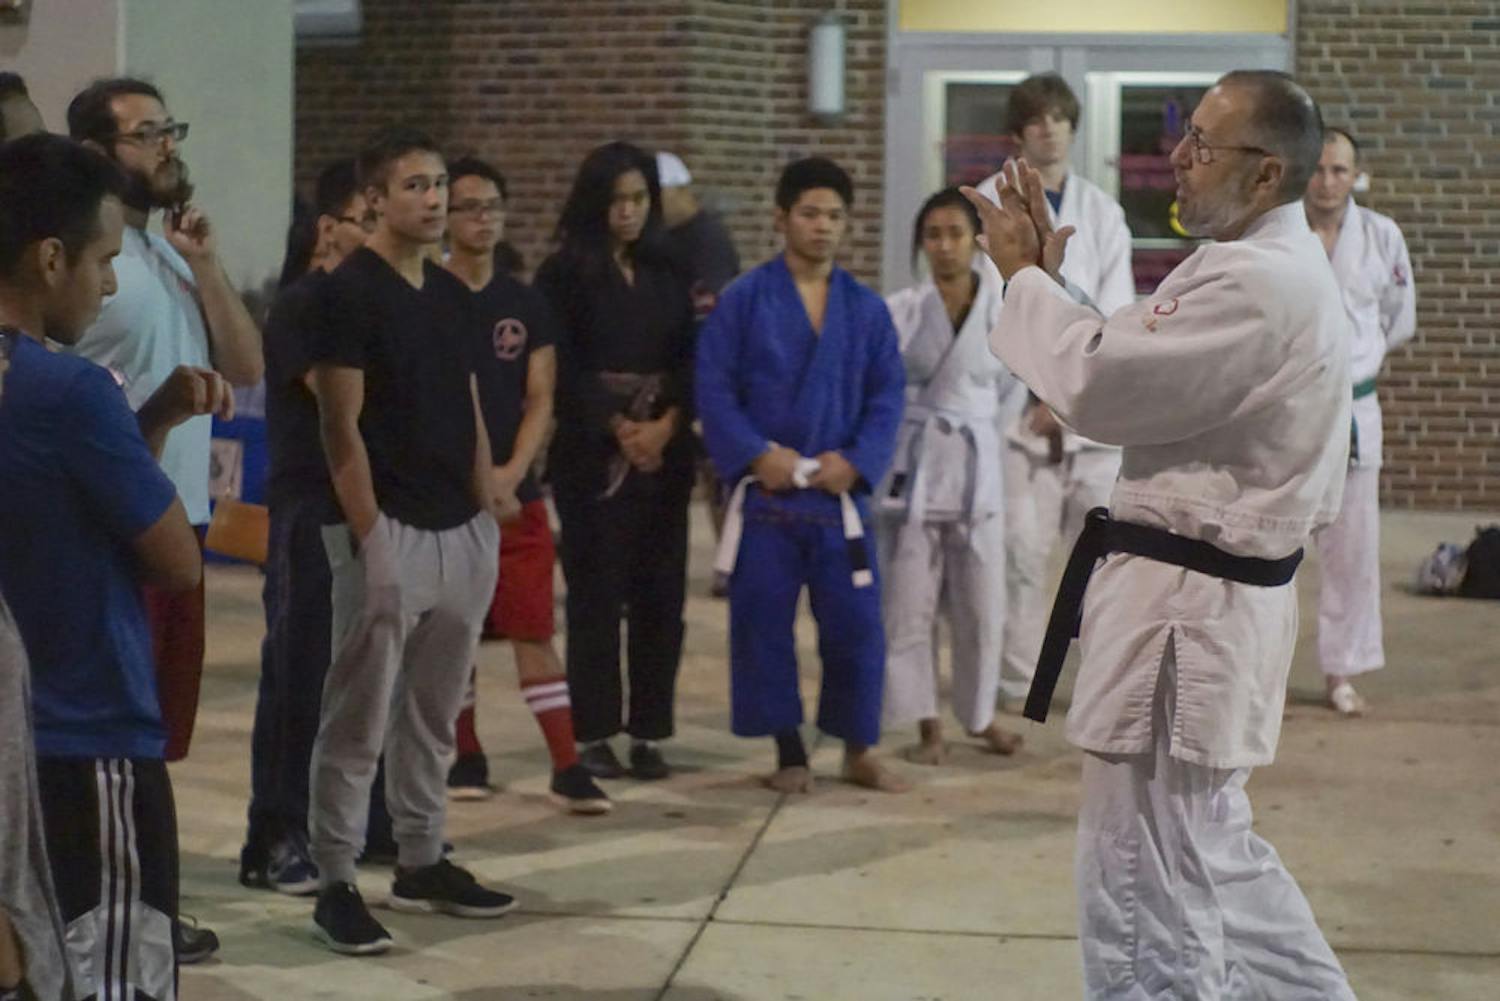 John Kammer, 66, teaches students the basics of judo Oct. 13, 2015, at Ben Hill Griffin Stadium during Asian Kaleidoscope Month’s Throwdown event. Kammer has been teaching judo for 43 years. He instructed students on basic techniques of striking, clinch-fighting and breaking grips.